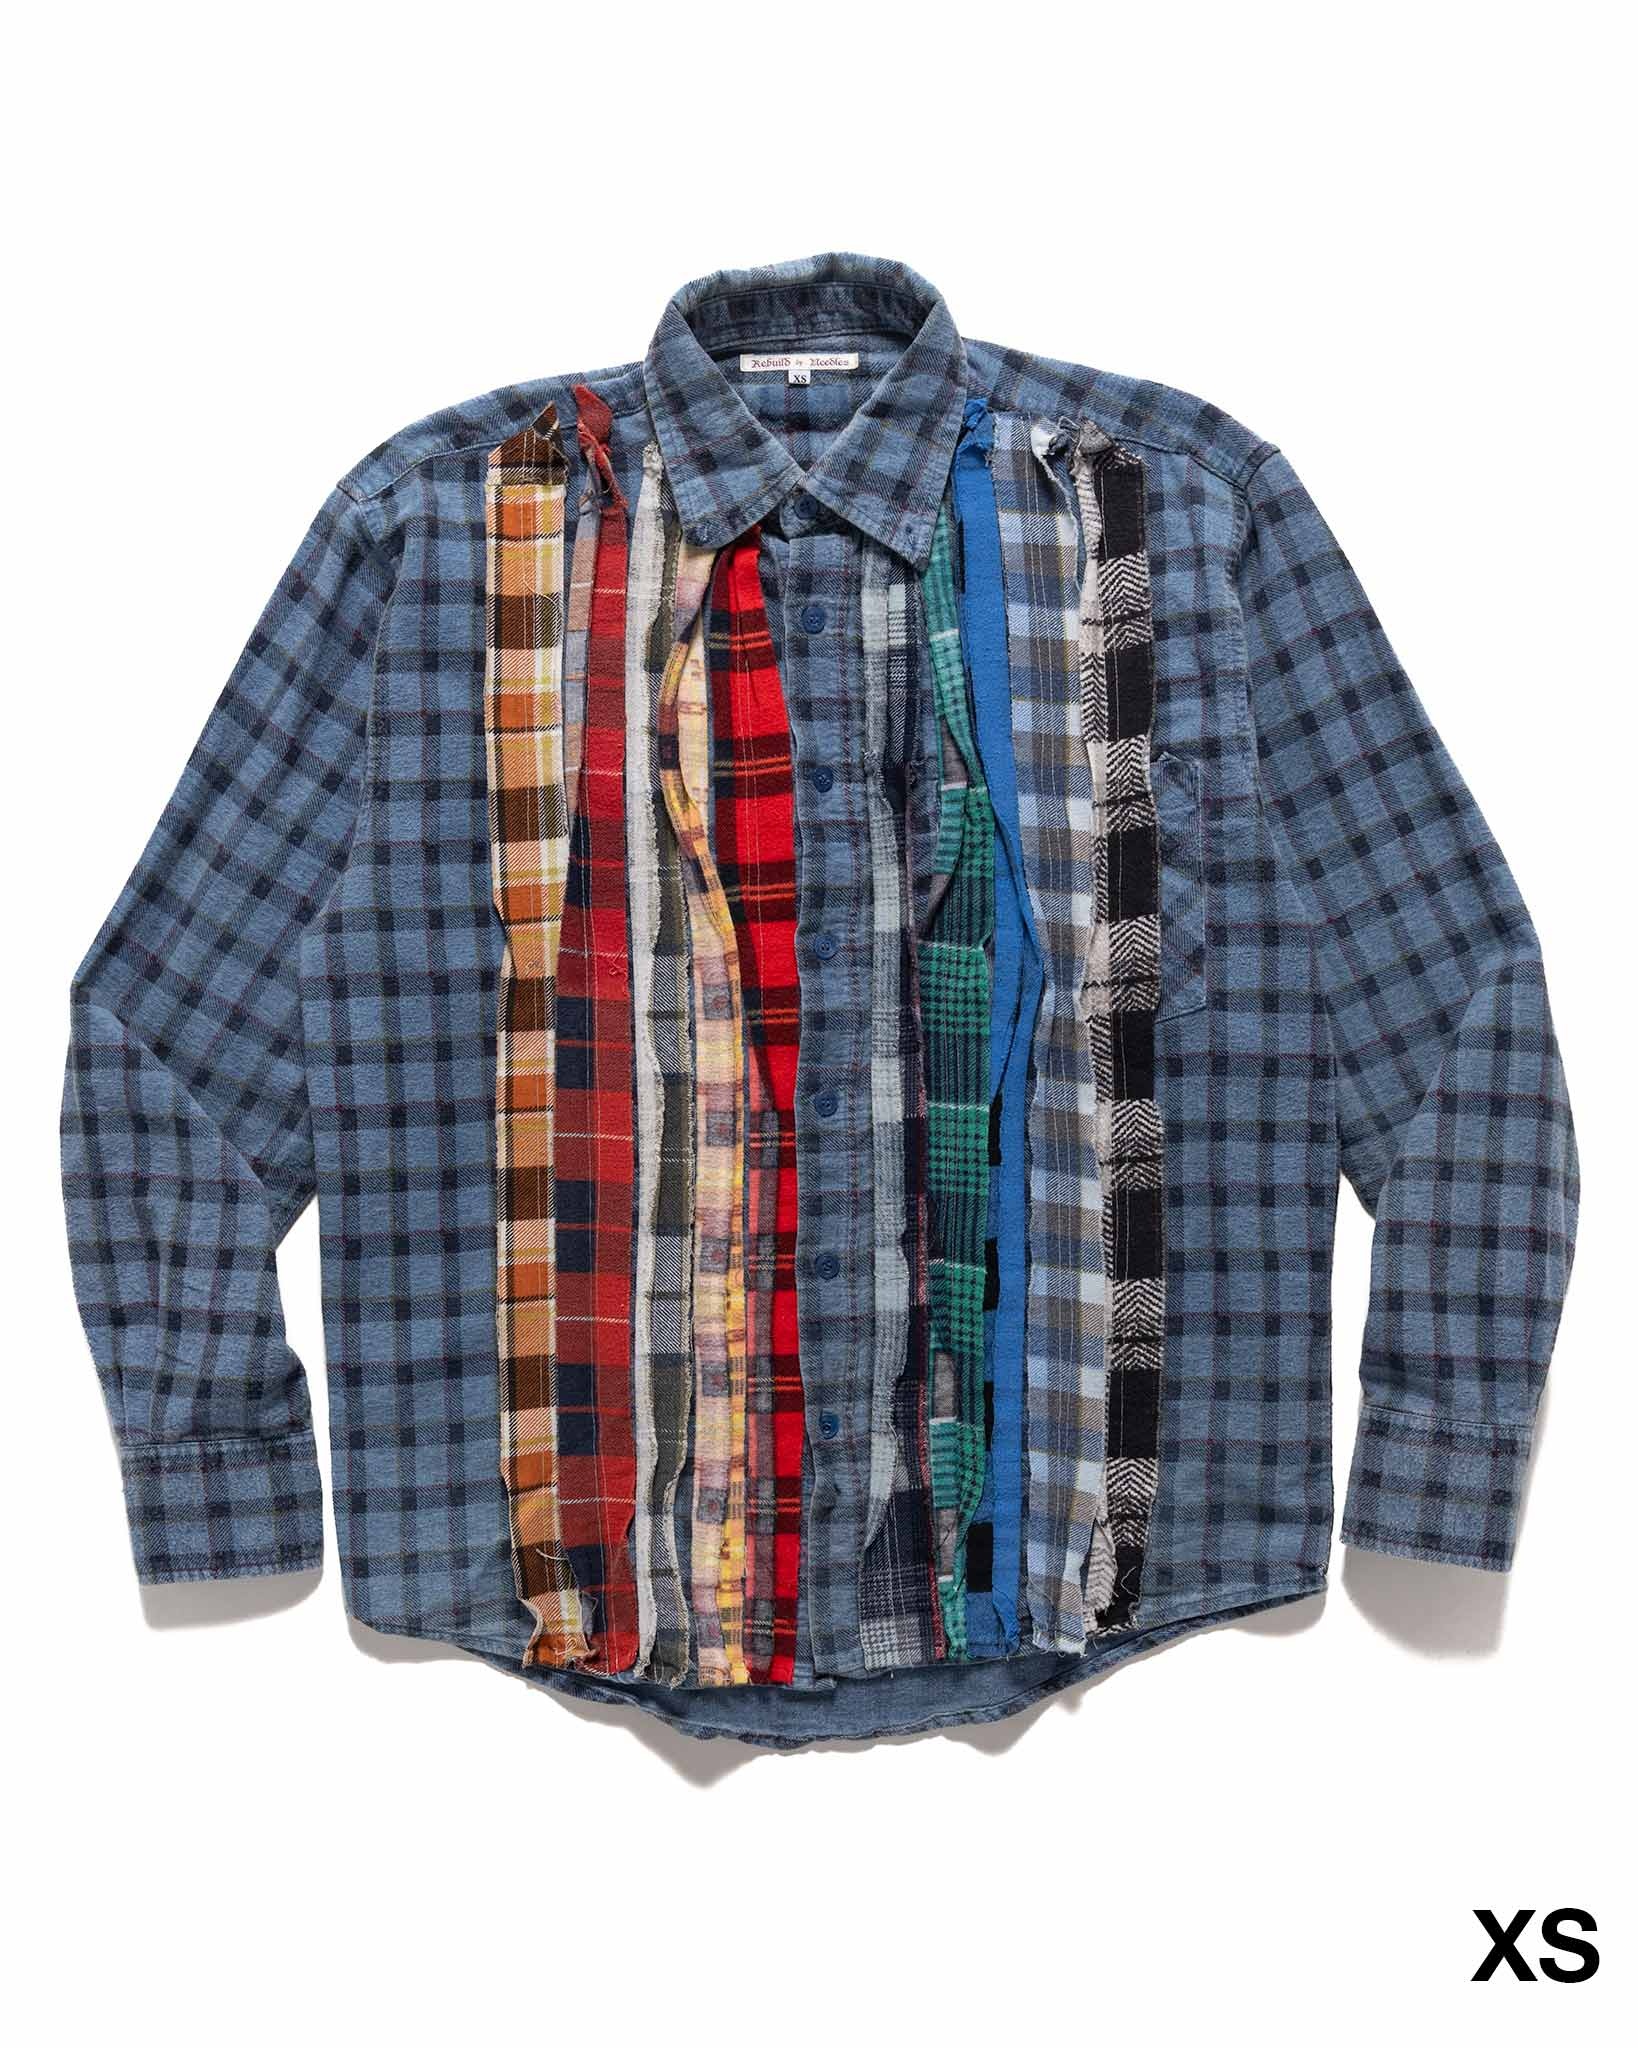 Rebuild by Needles Flannel Shirt -> Ribbon Shirt Assorted - 5